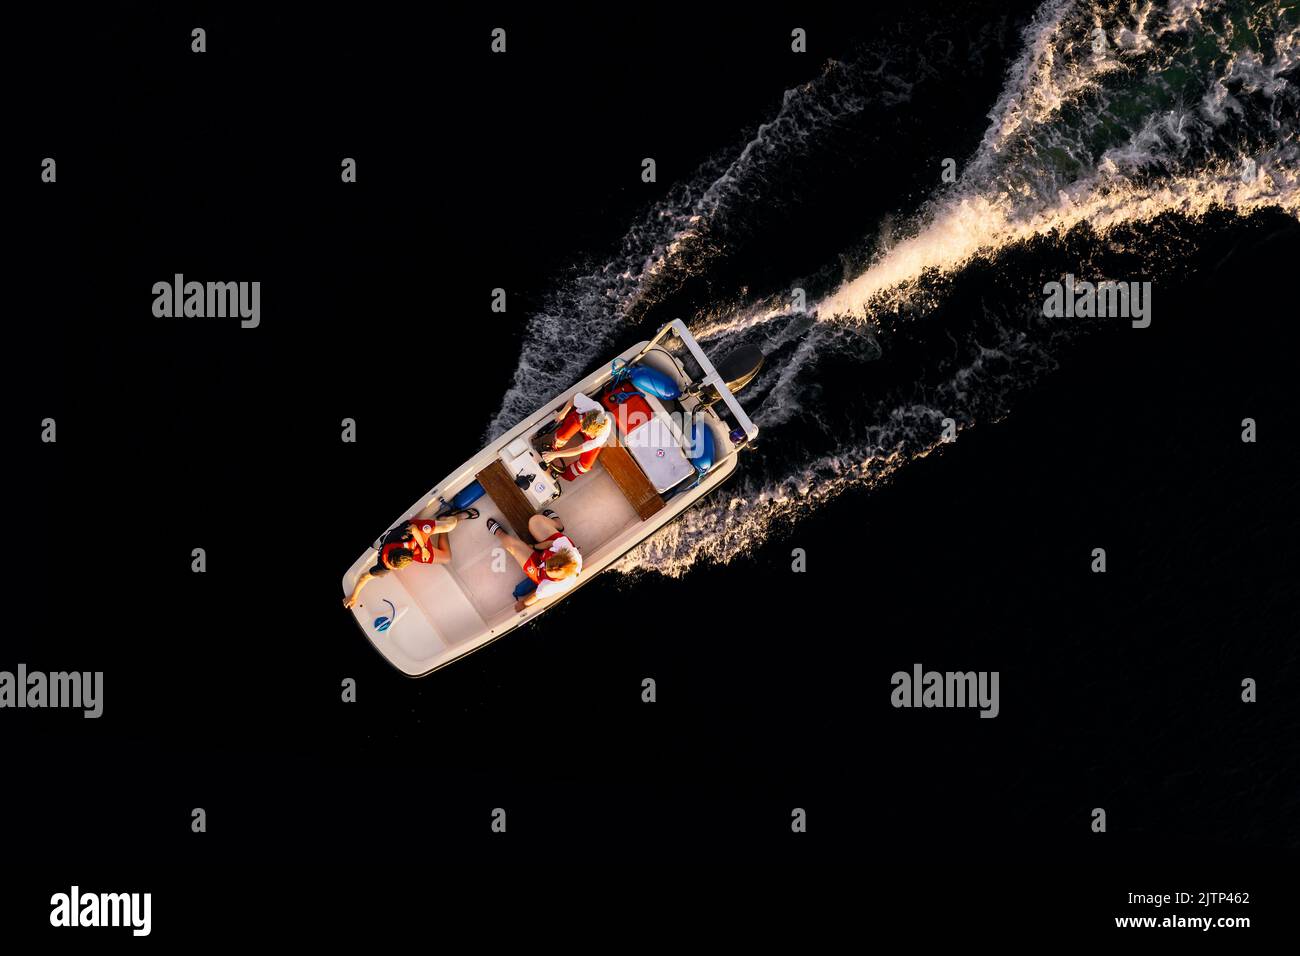 Aerial shot of a water rescue motorboat in evening light. Stock Photo